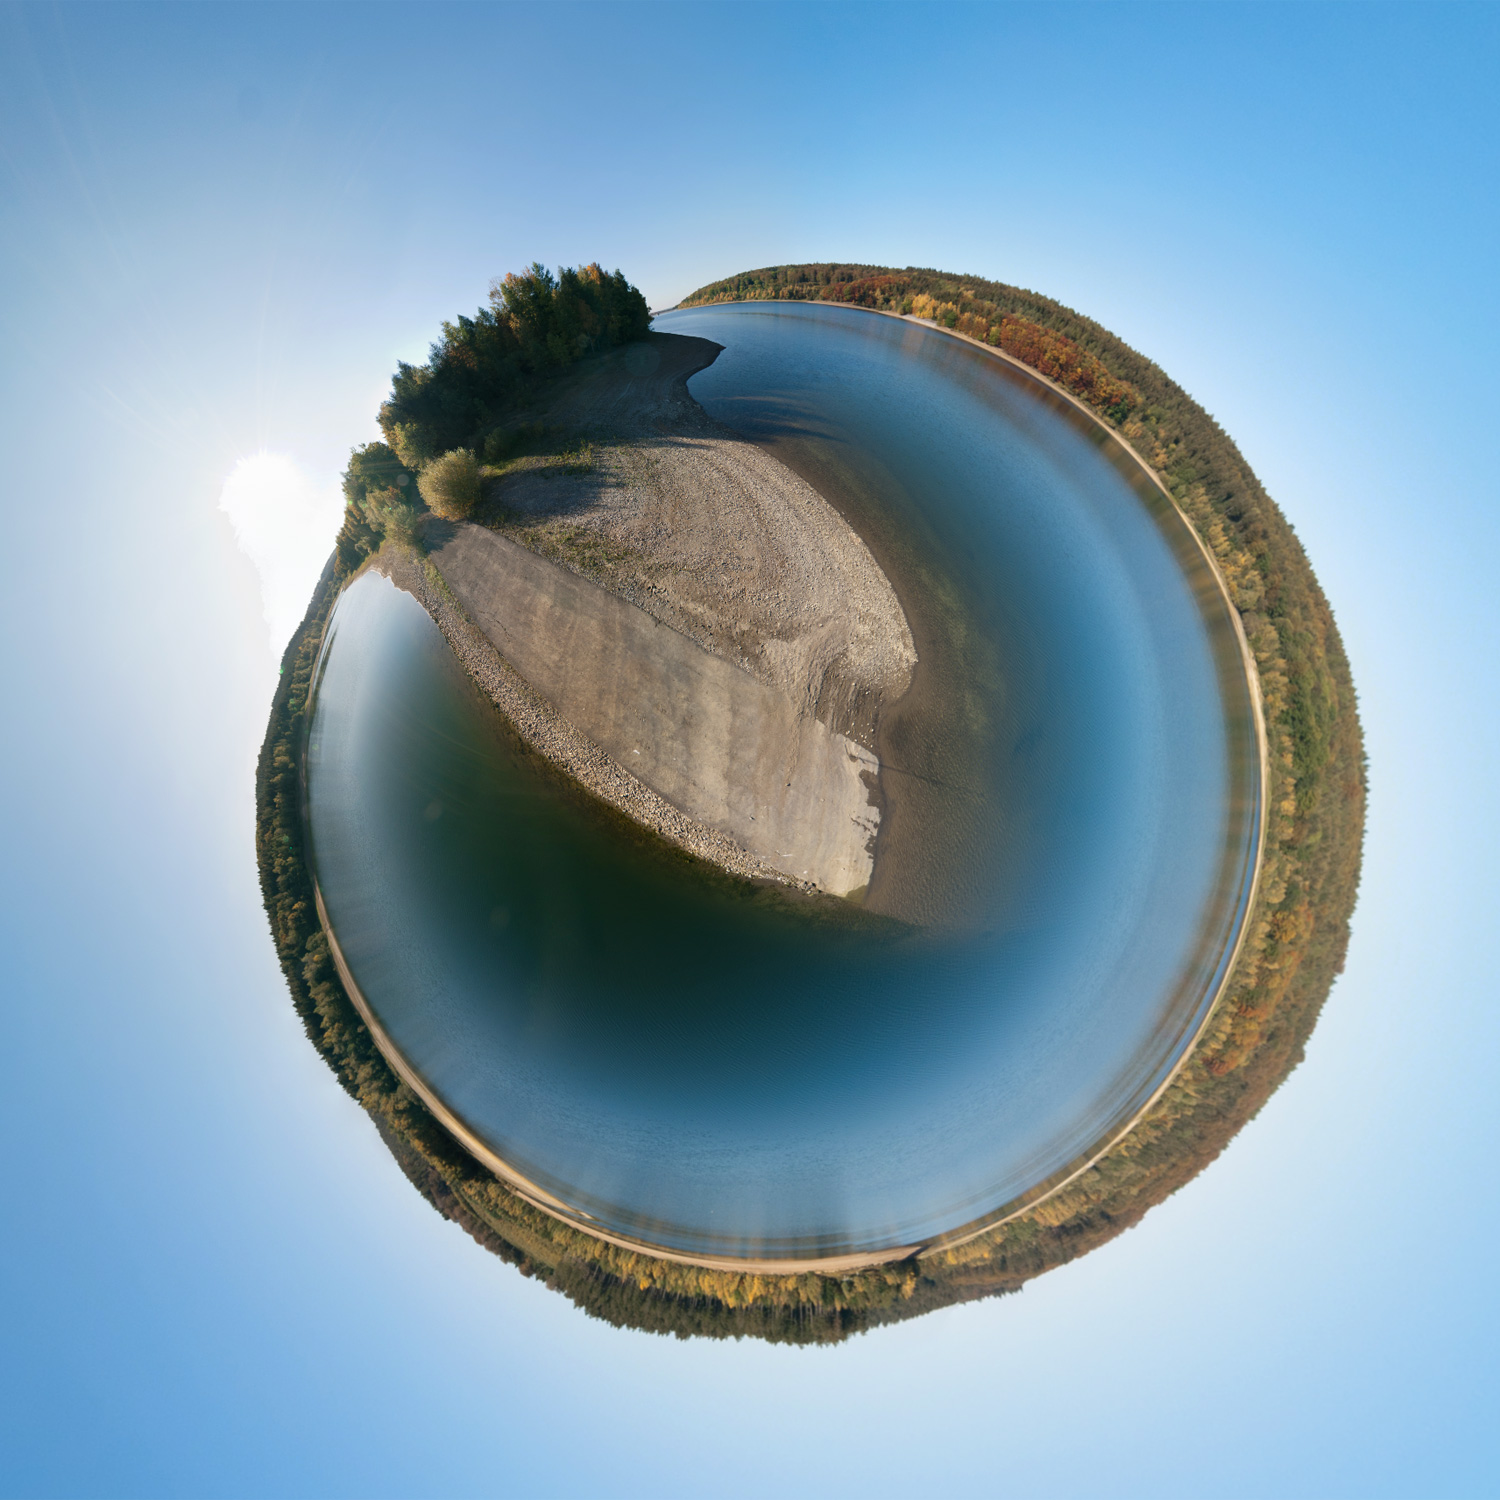 Panorama 091 - Little Planet